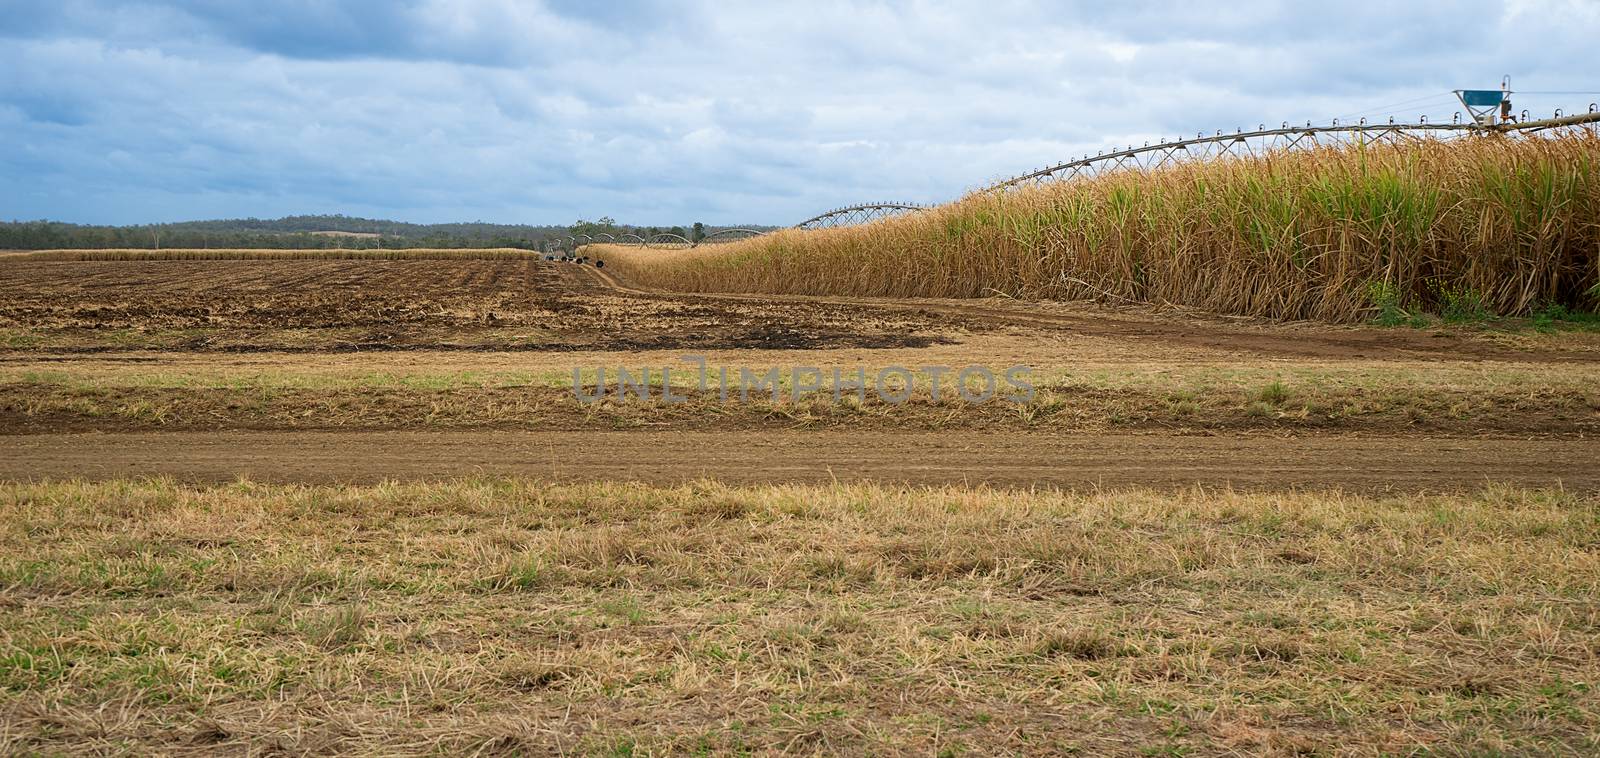 Australian Sugarcane Farm with harvested field and a field of sugar cane growing ready for harvest in winter